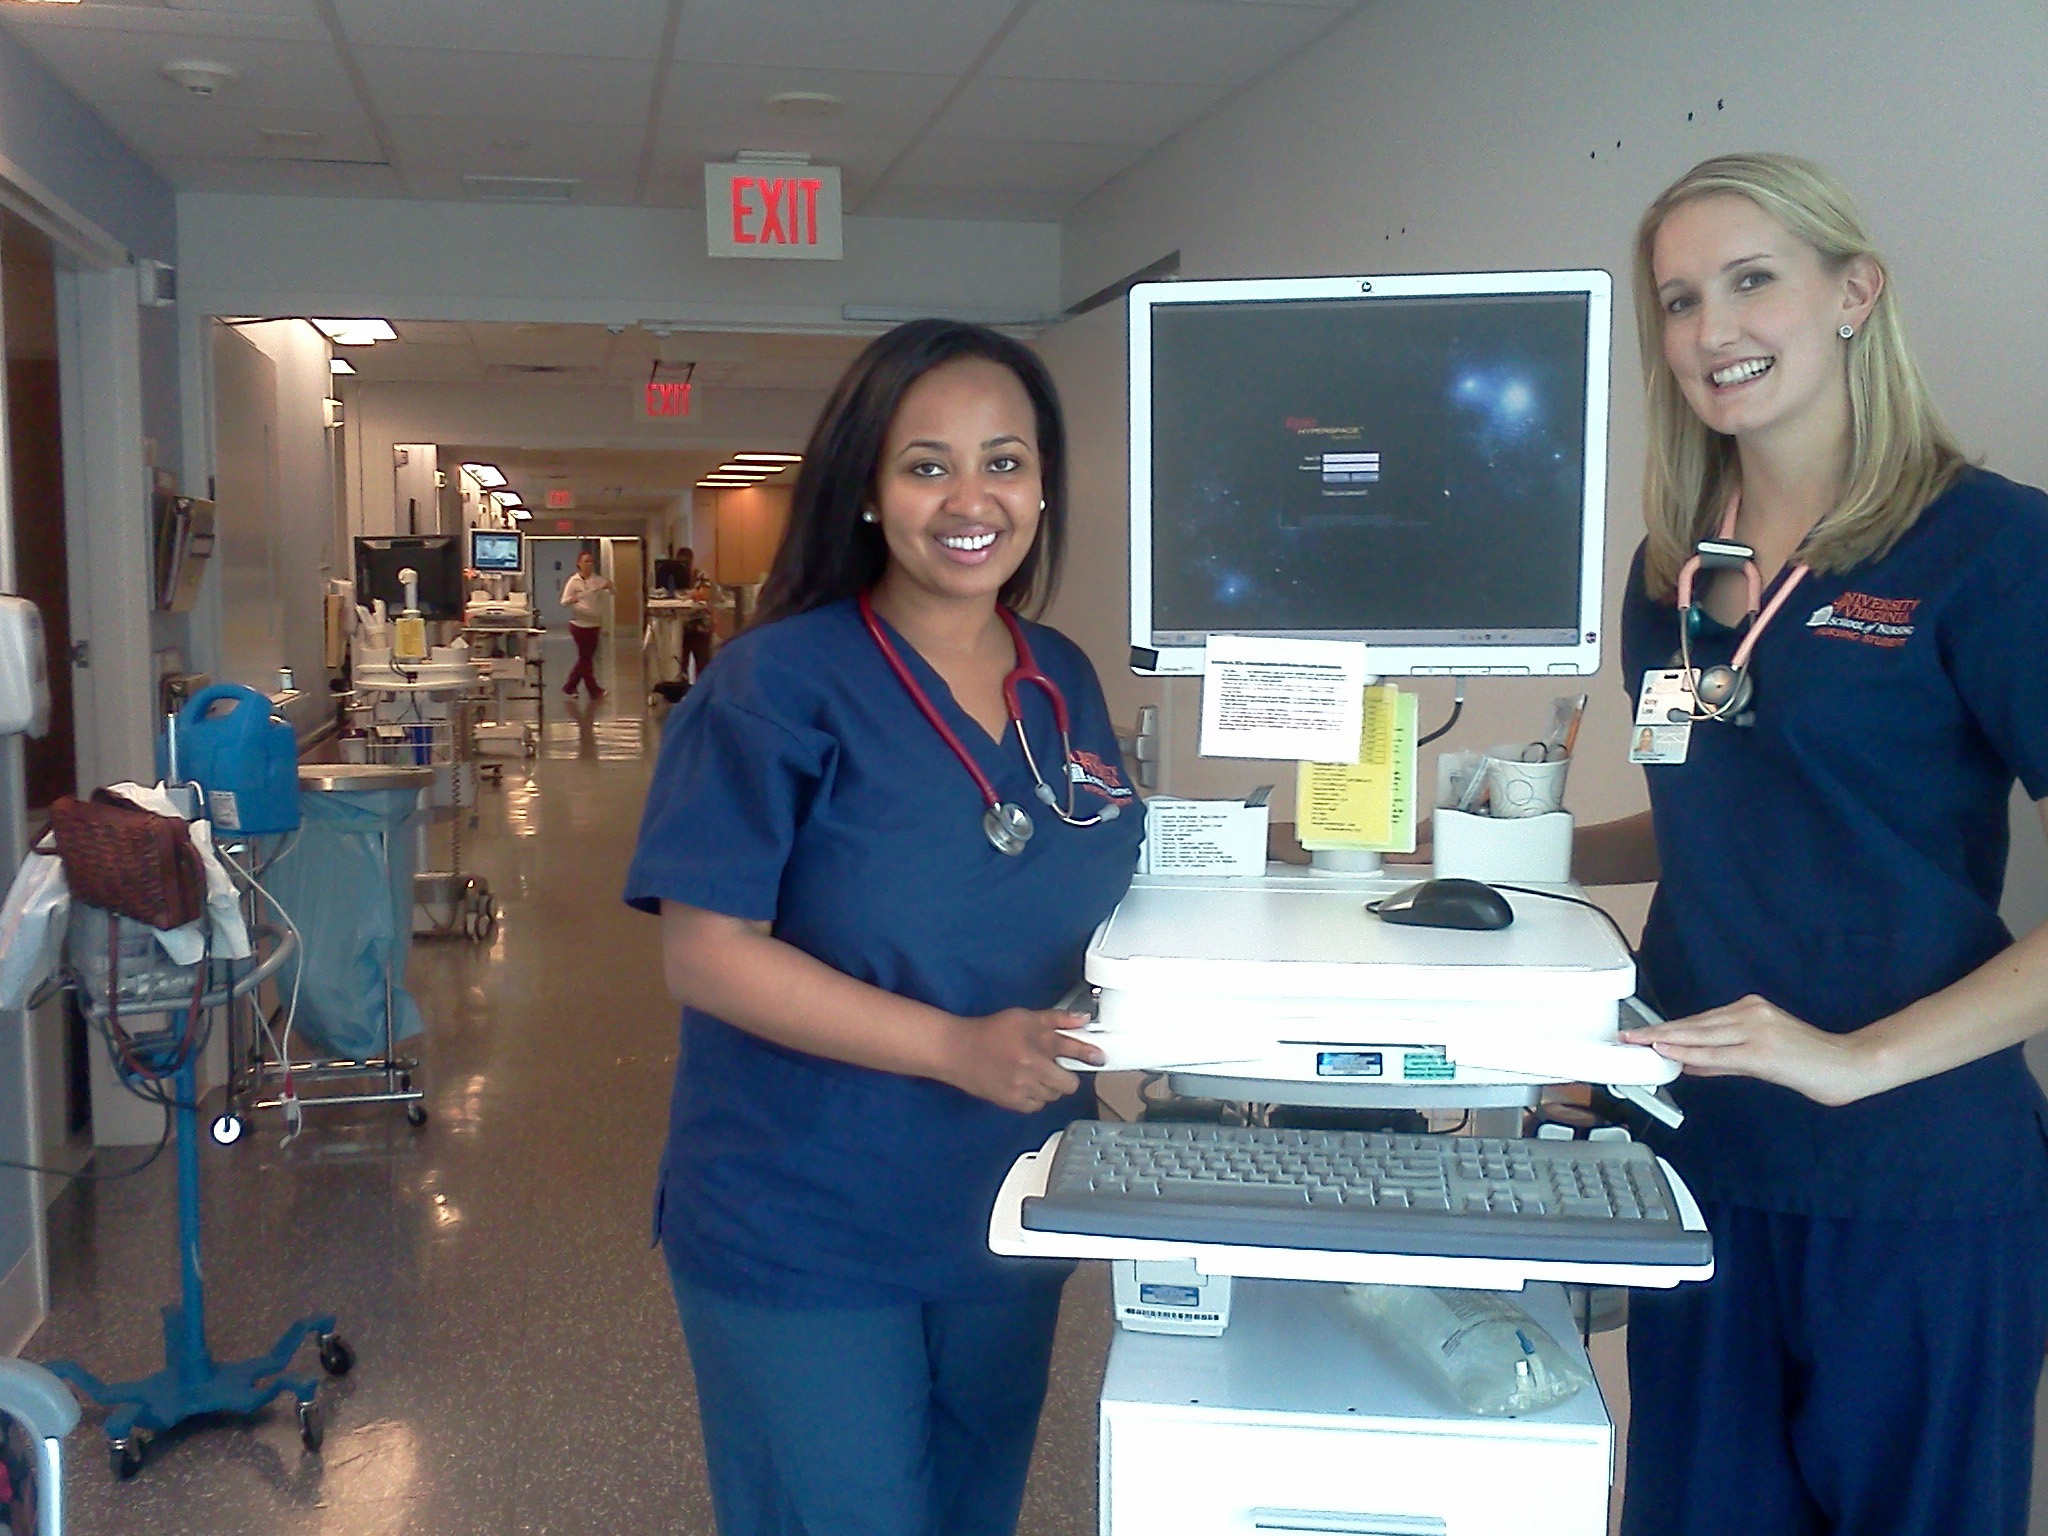 Blen Afework and Amy Lee stand next to a computer cart in the hospital smiling at the camera